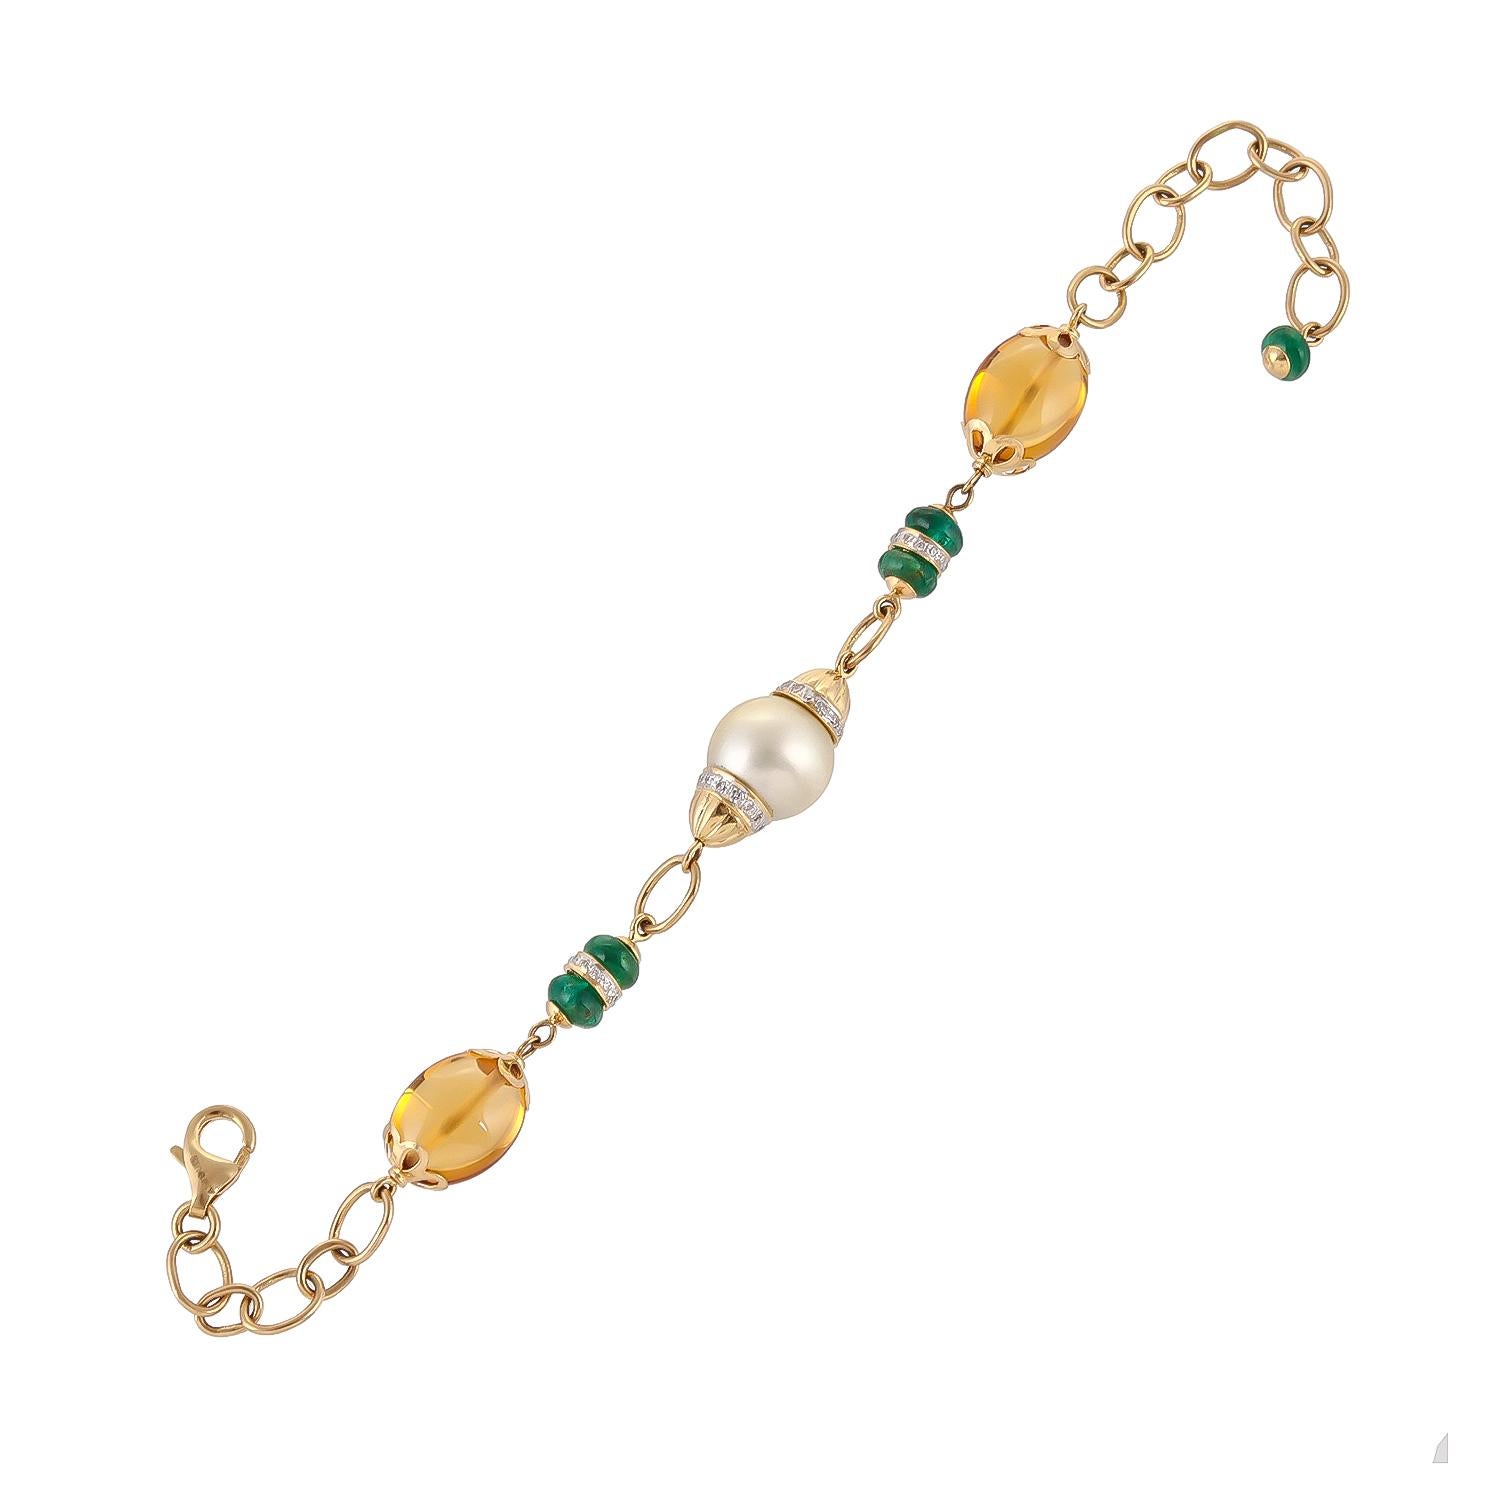 15.08 carats citrine tumbles are played with 3.92 carats emerald beads and further enhanced with white 9.59 carats south sea pearl and 0.35 carats diamonds work in harmony in this chic 18 karats yellow gold bracelet.
Art of gifting: the Jewel is